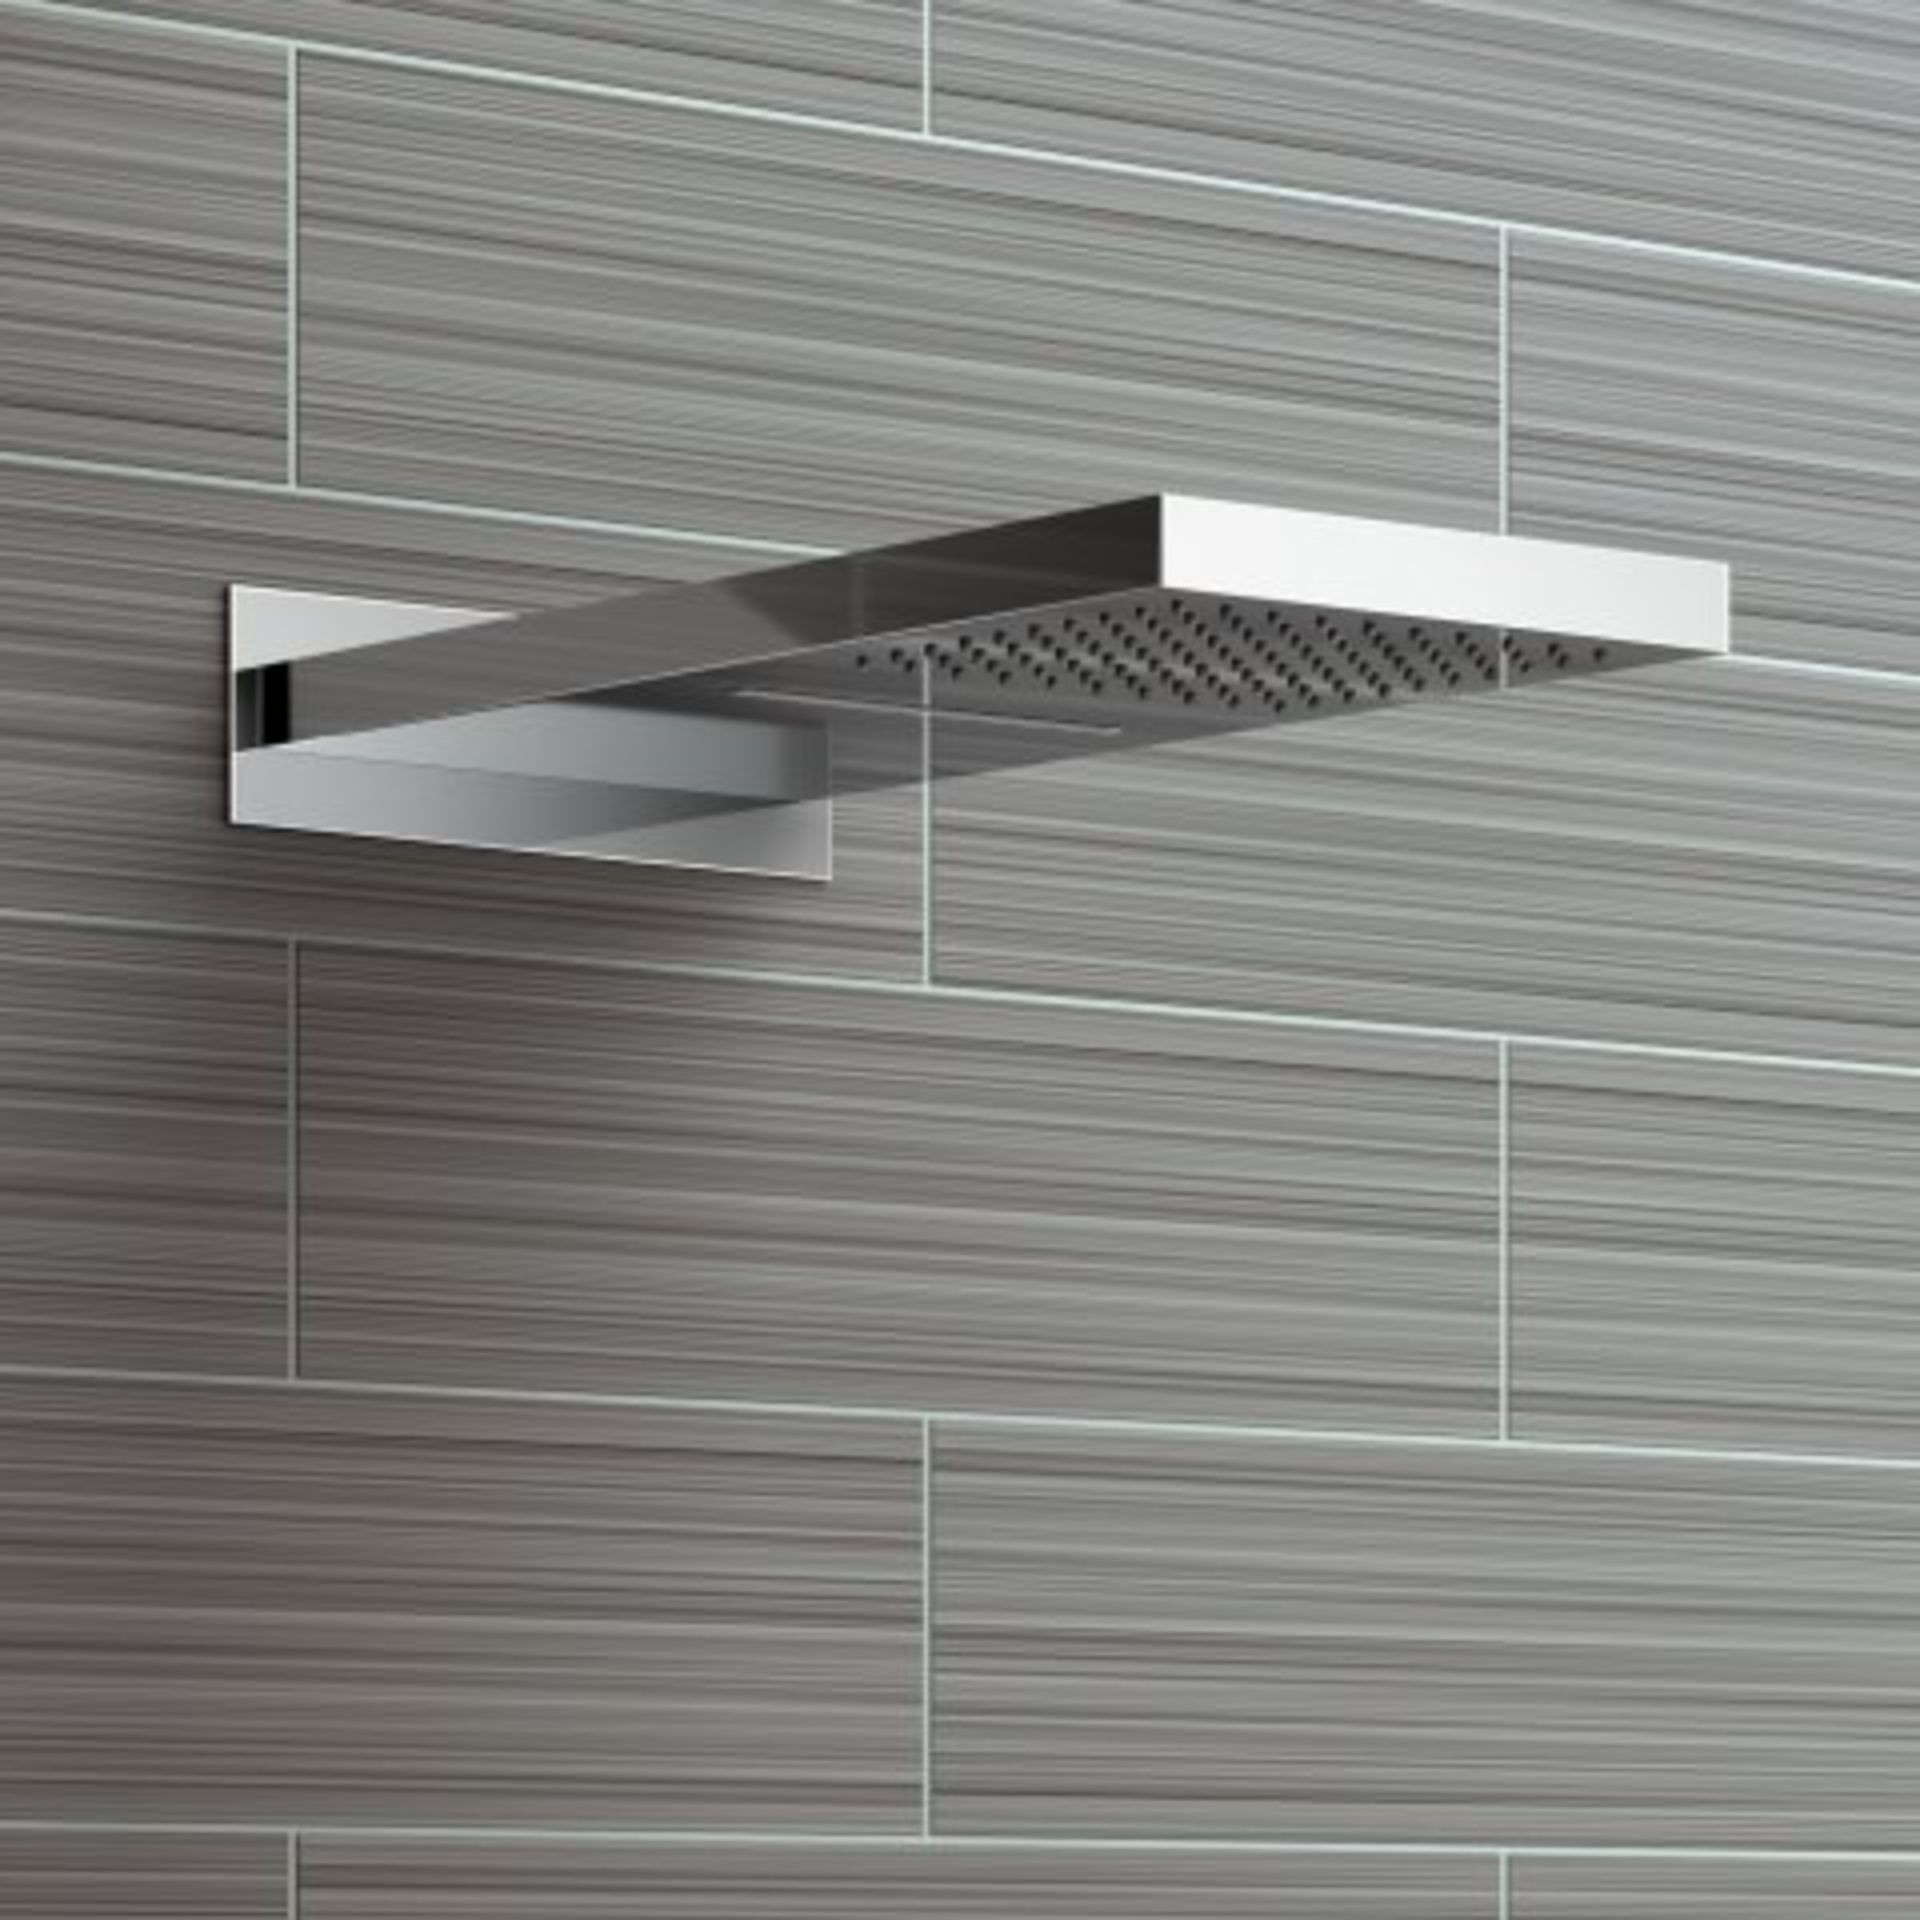 (I49) Stainless Steel 200x500mm Waterfall Shower Head RRP £374.99 "What An Experience": Enjoy - Image 4 of 5